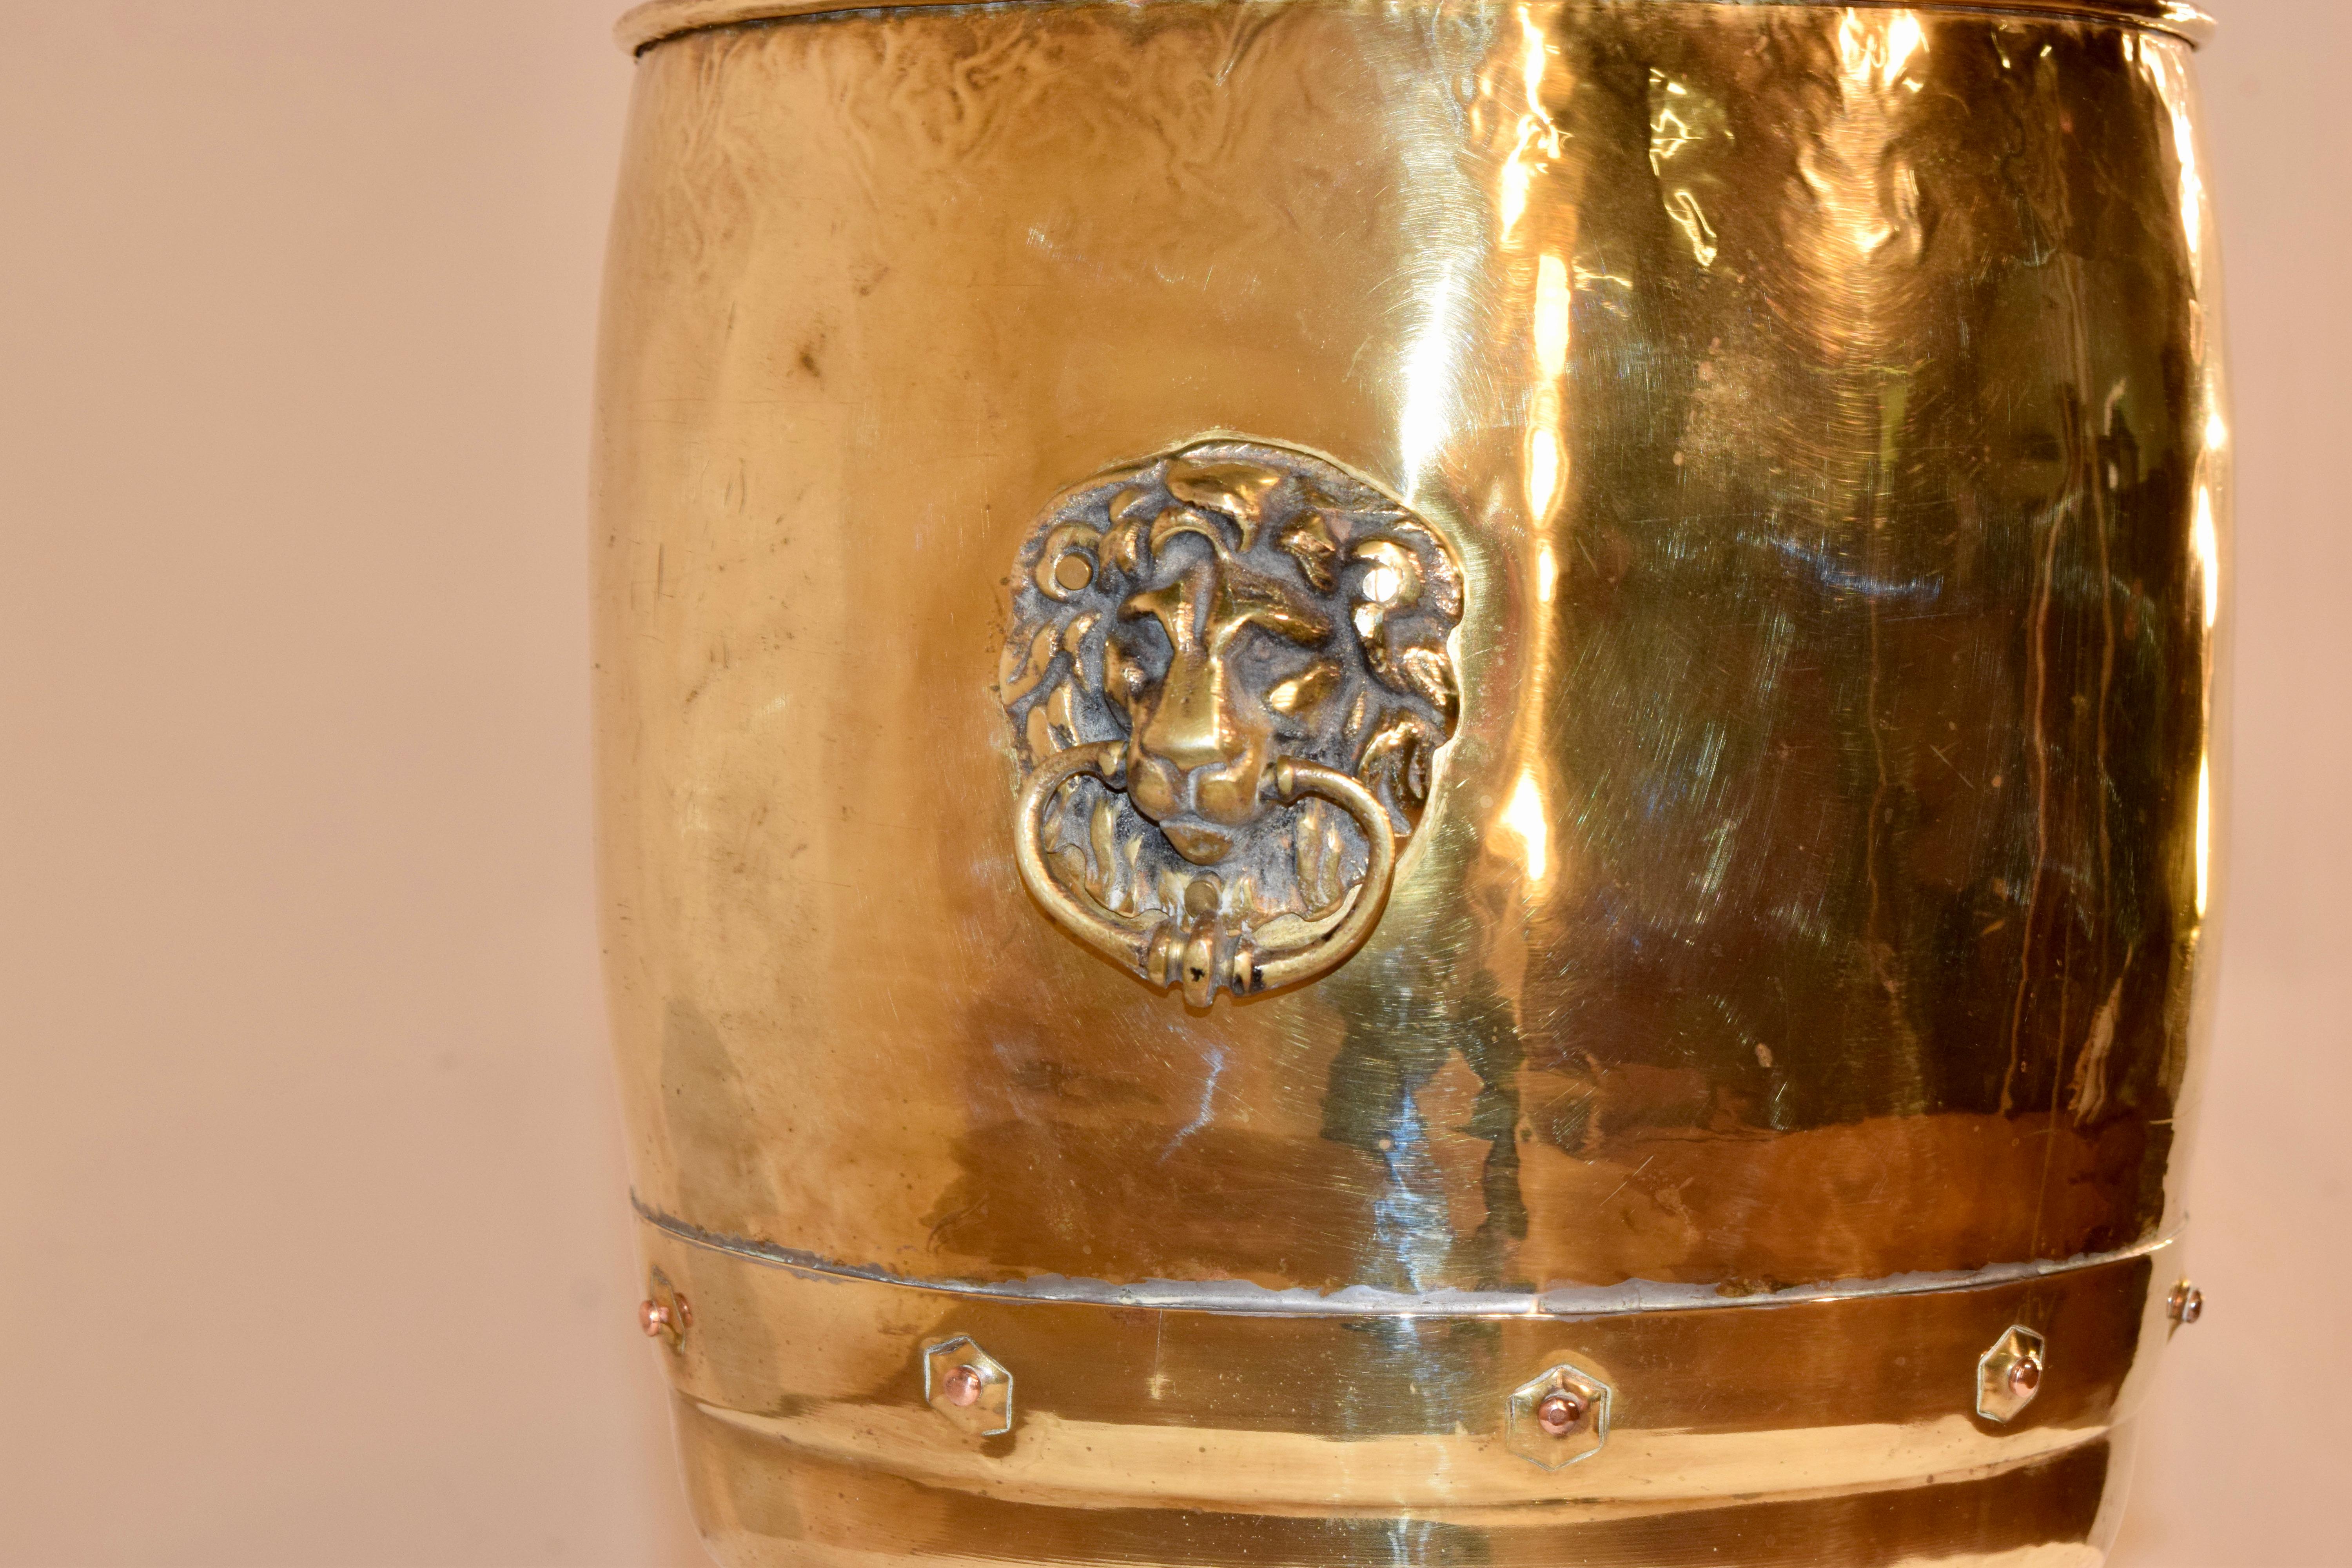 19th century brass coal hod with a rolled edge, banded and decorated with copper rivets. Beautifully hand made with hand cast lion's head handles on each side and supported on hand cast paw feet.